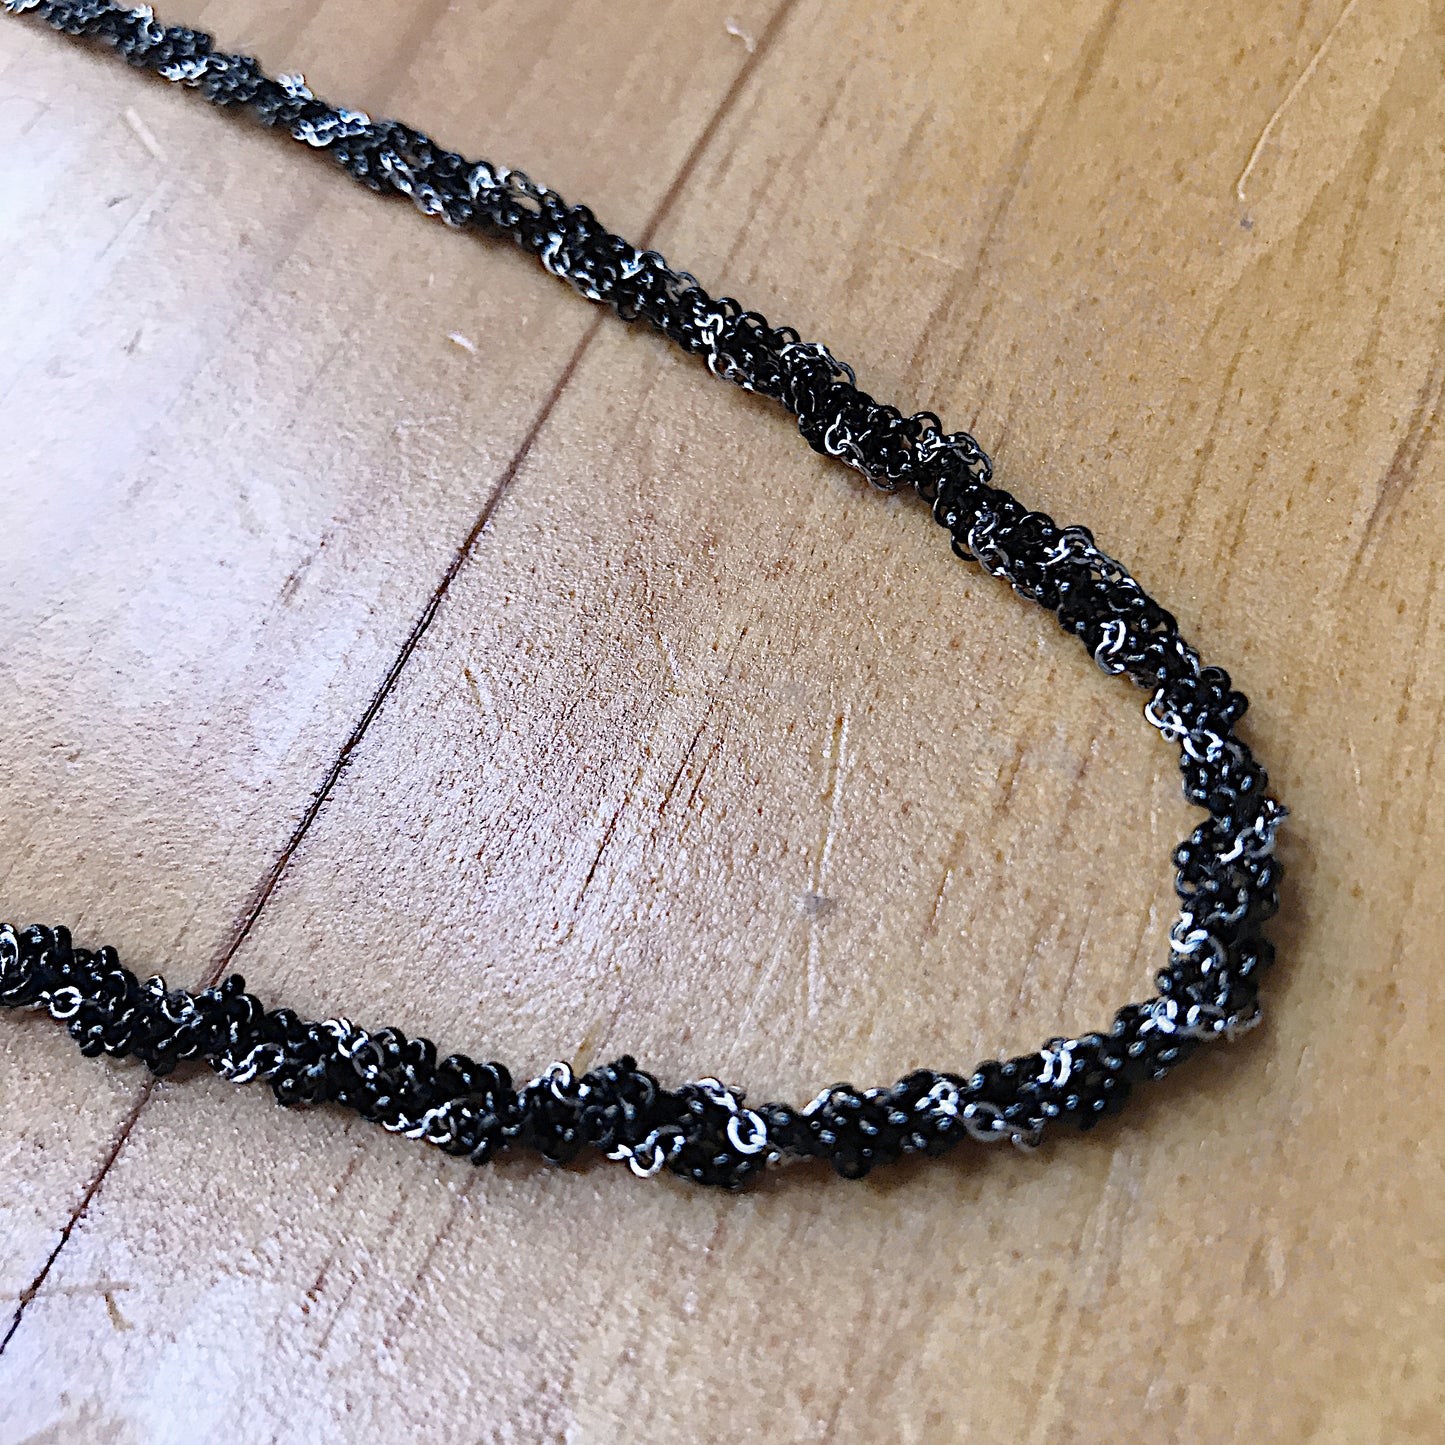 Braided Black and Silver Metal Necklace Chain (5mm)